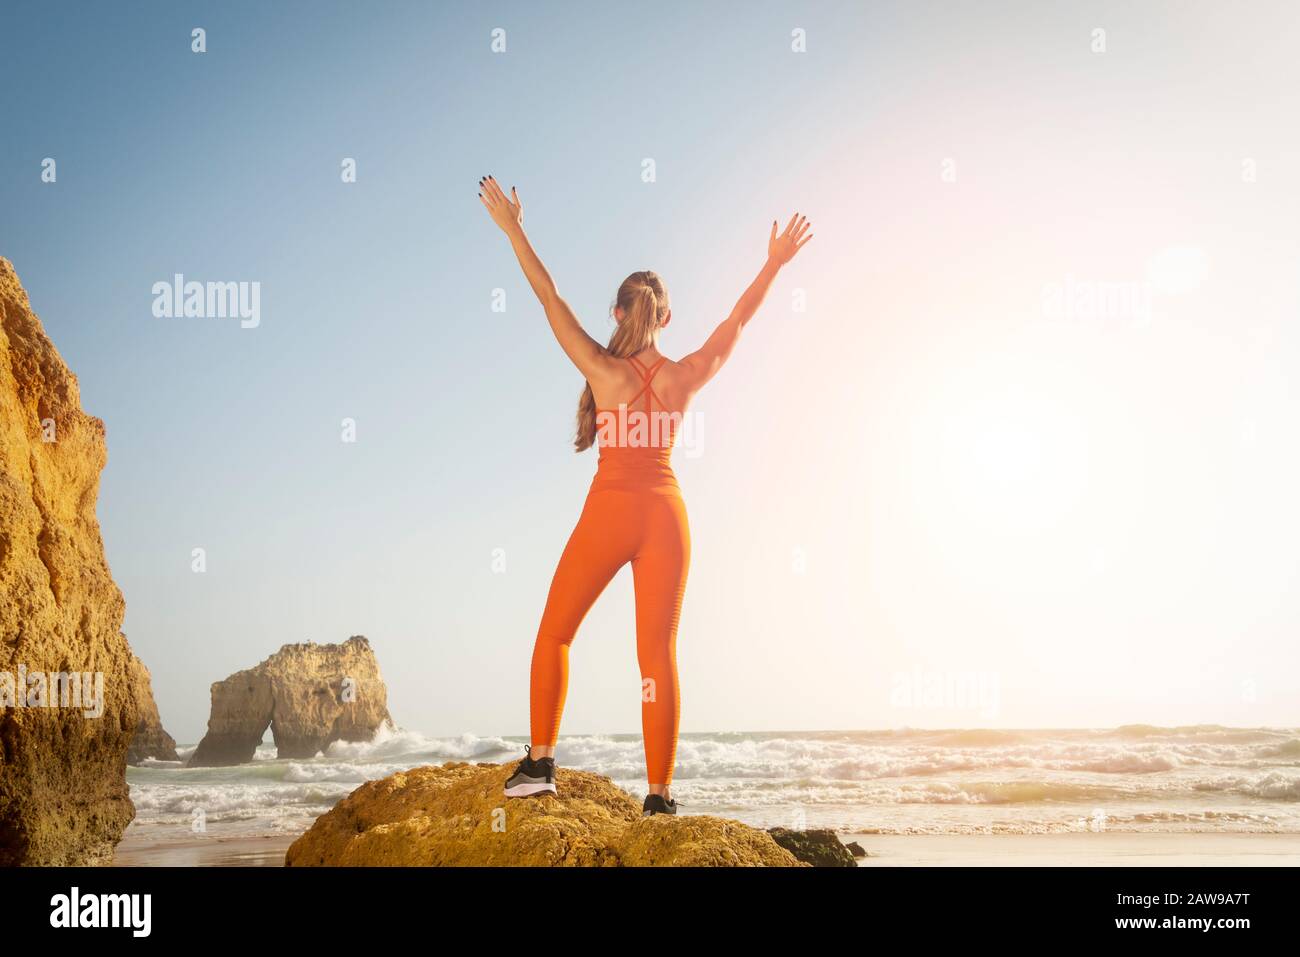 Back view of a fit woman wearing orange sportswear standing on a rock by the sea with her arms raised in celebration, freedom. Stock Photo